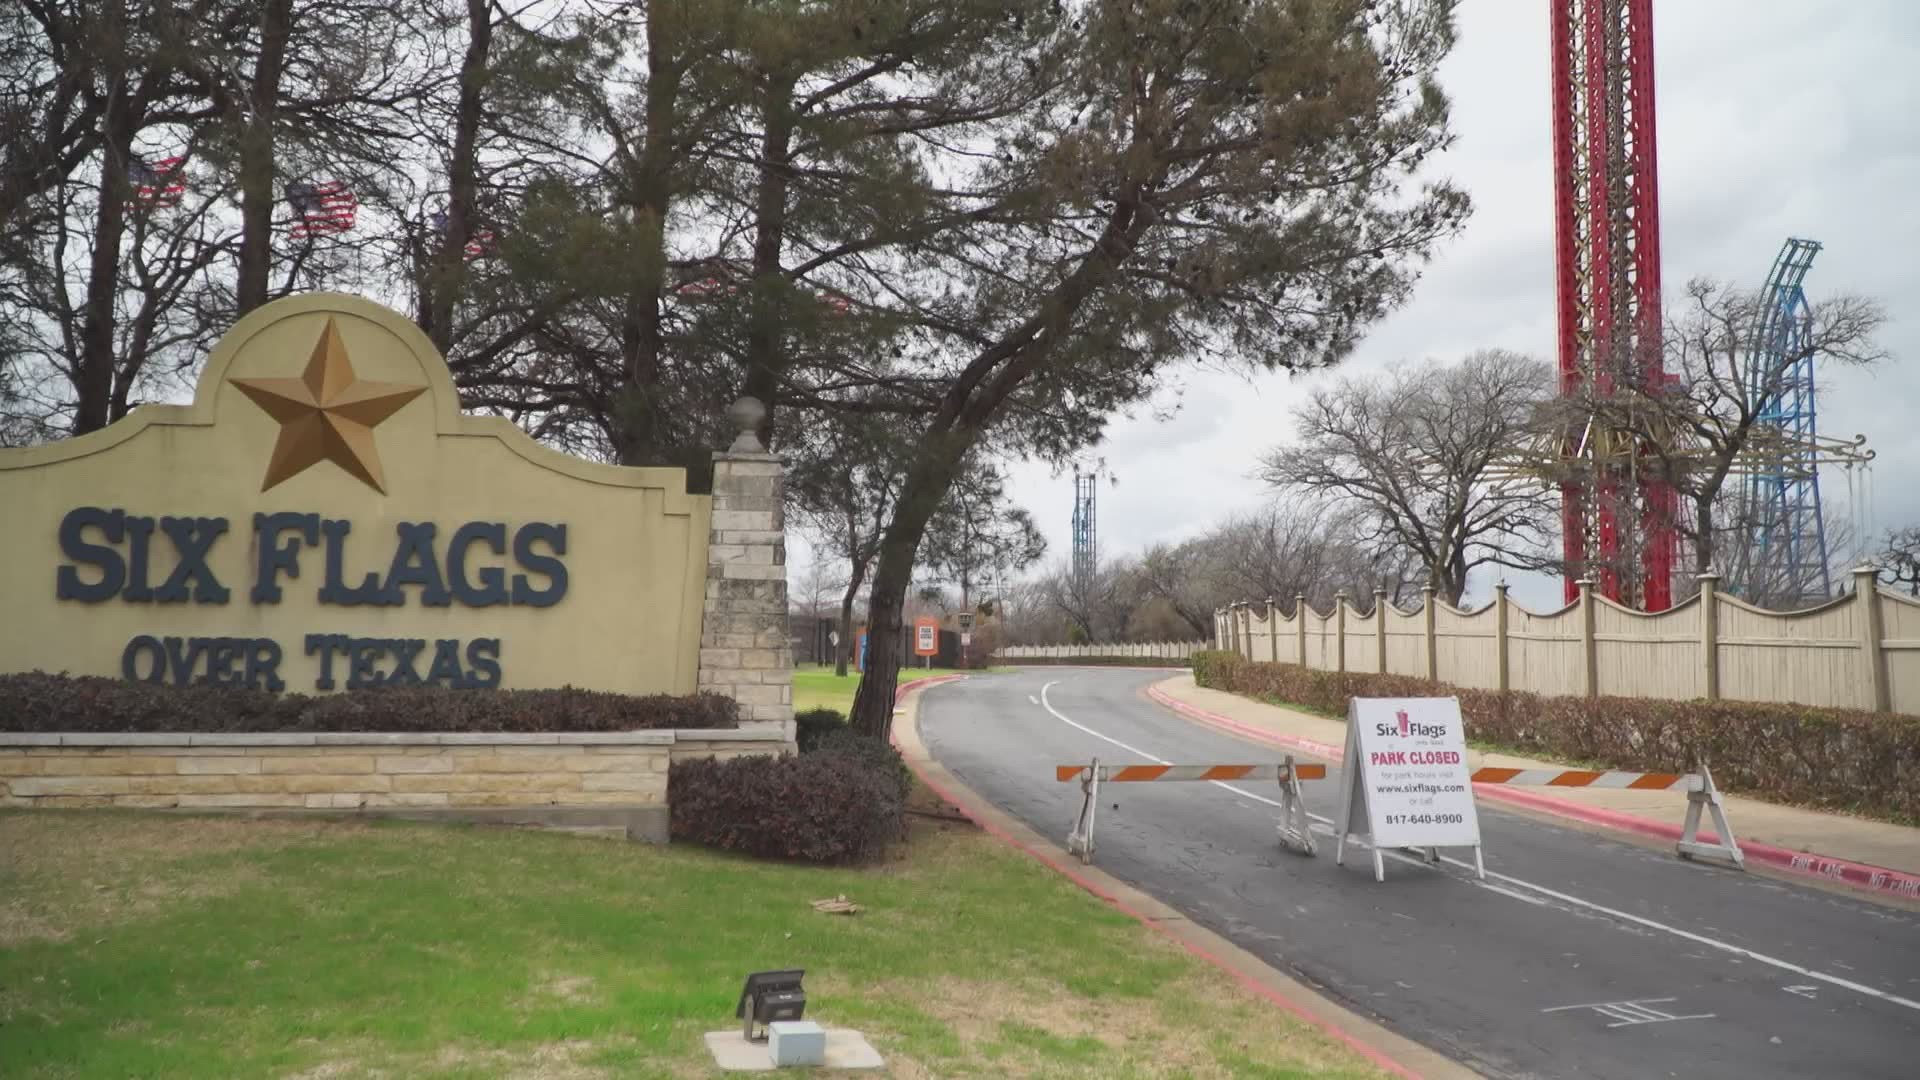 Six Flags officials said they will be tracking crowd sizes, doing a lot of sanitizing and requiring masks during opening weekend in North Texas.